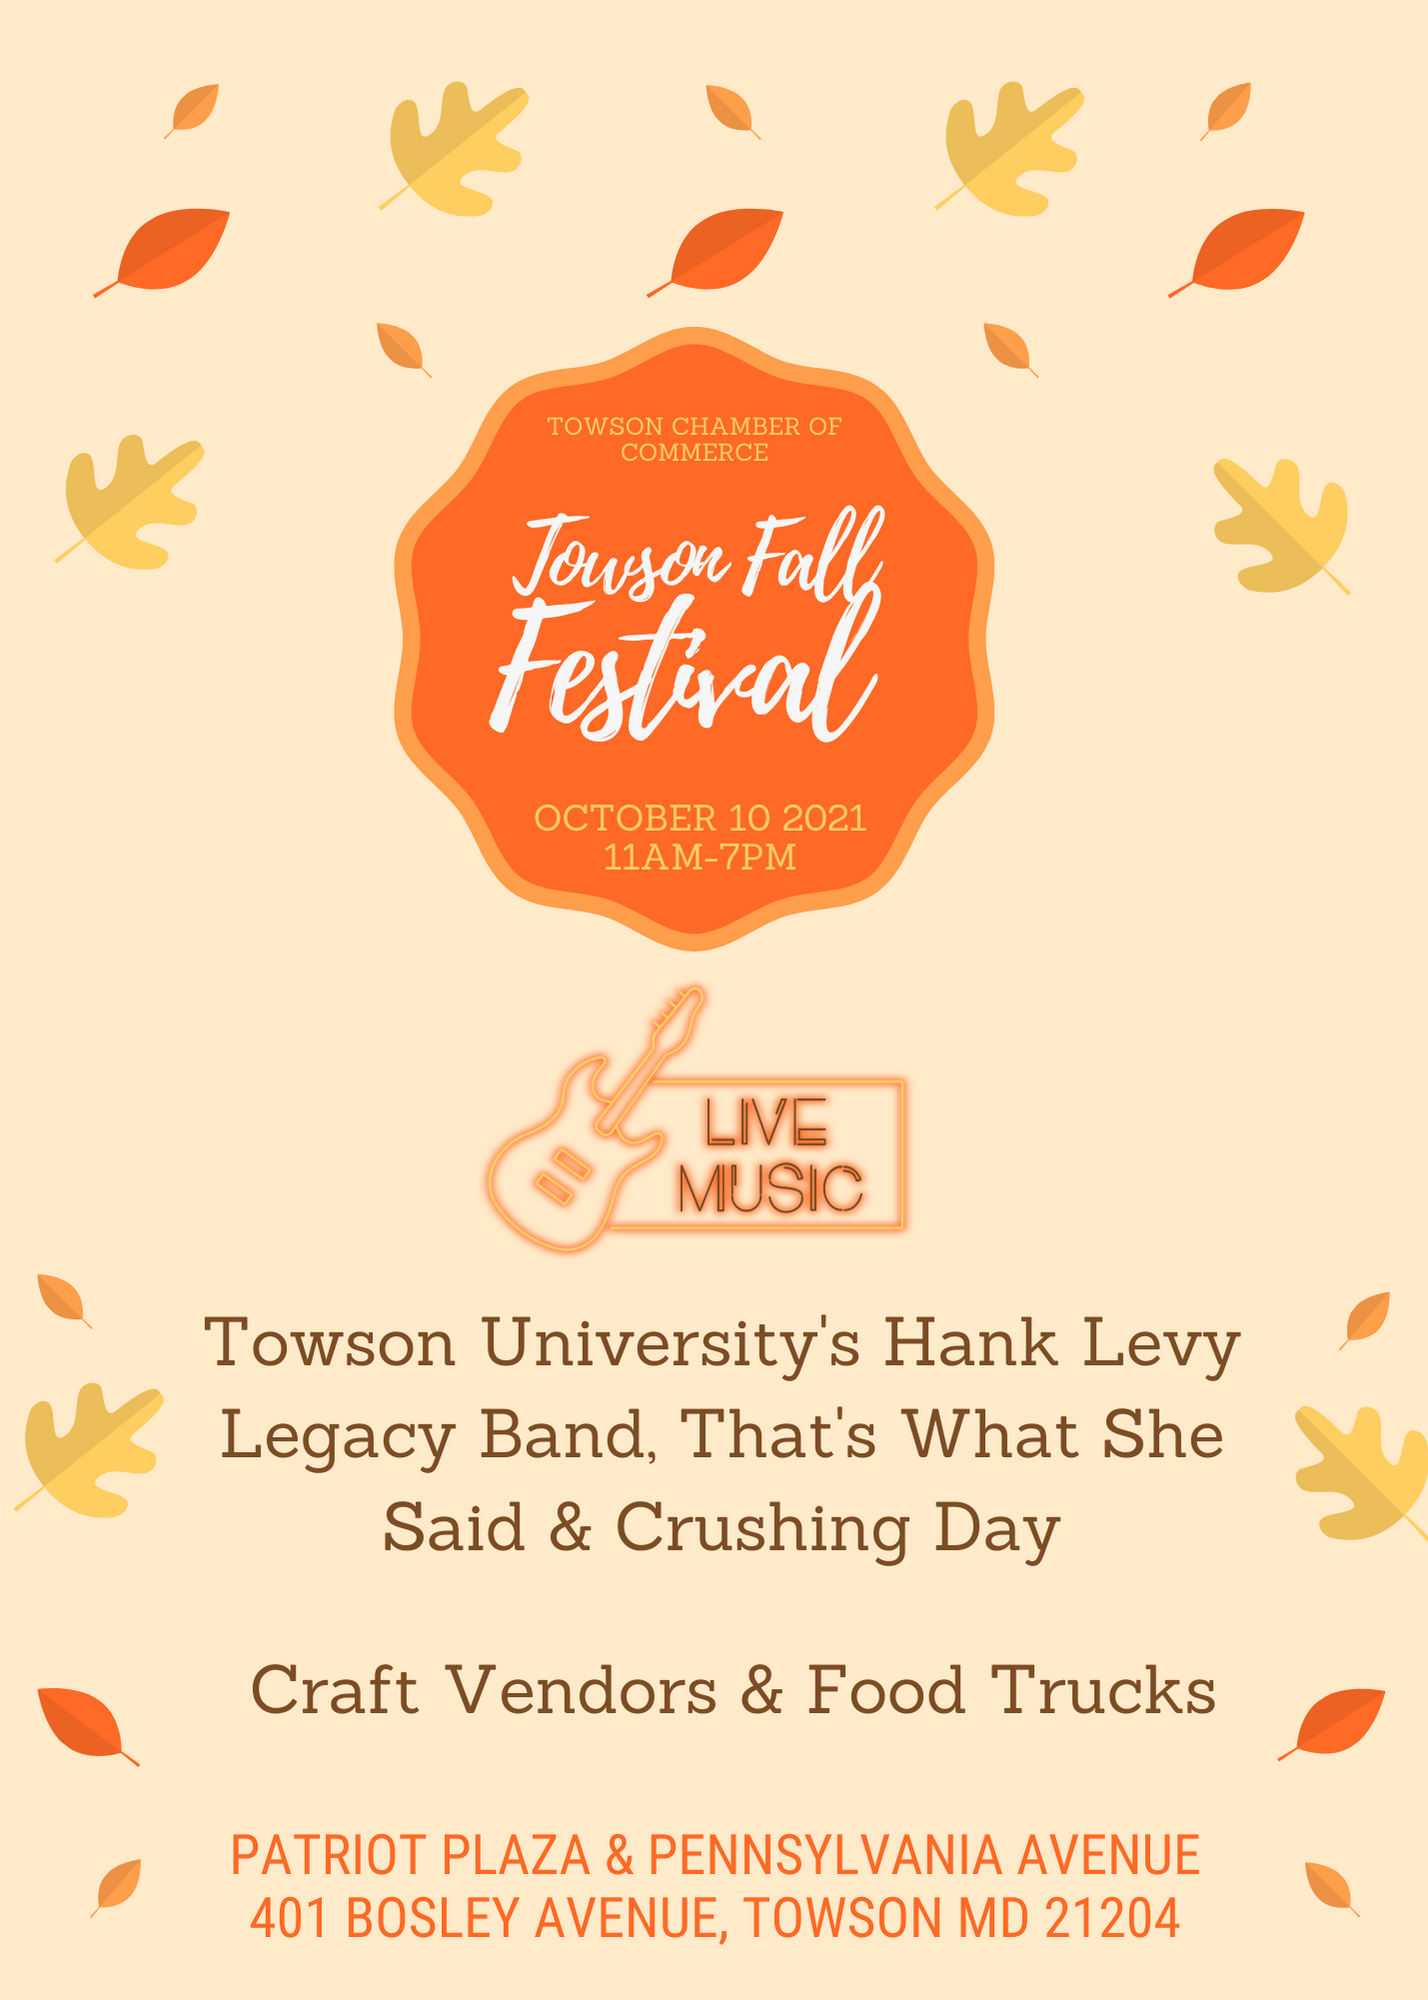 Towson Fall Festival – Towson Chamber of Commerce